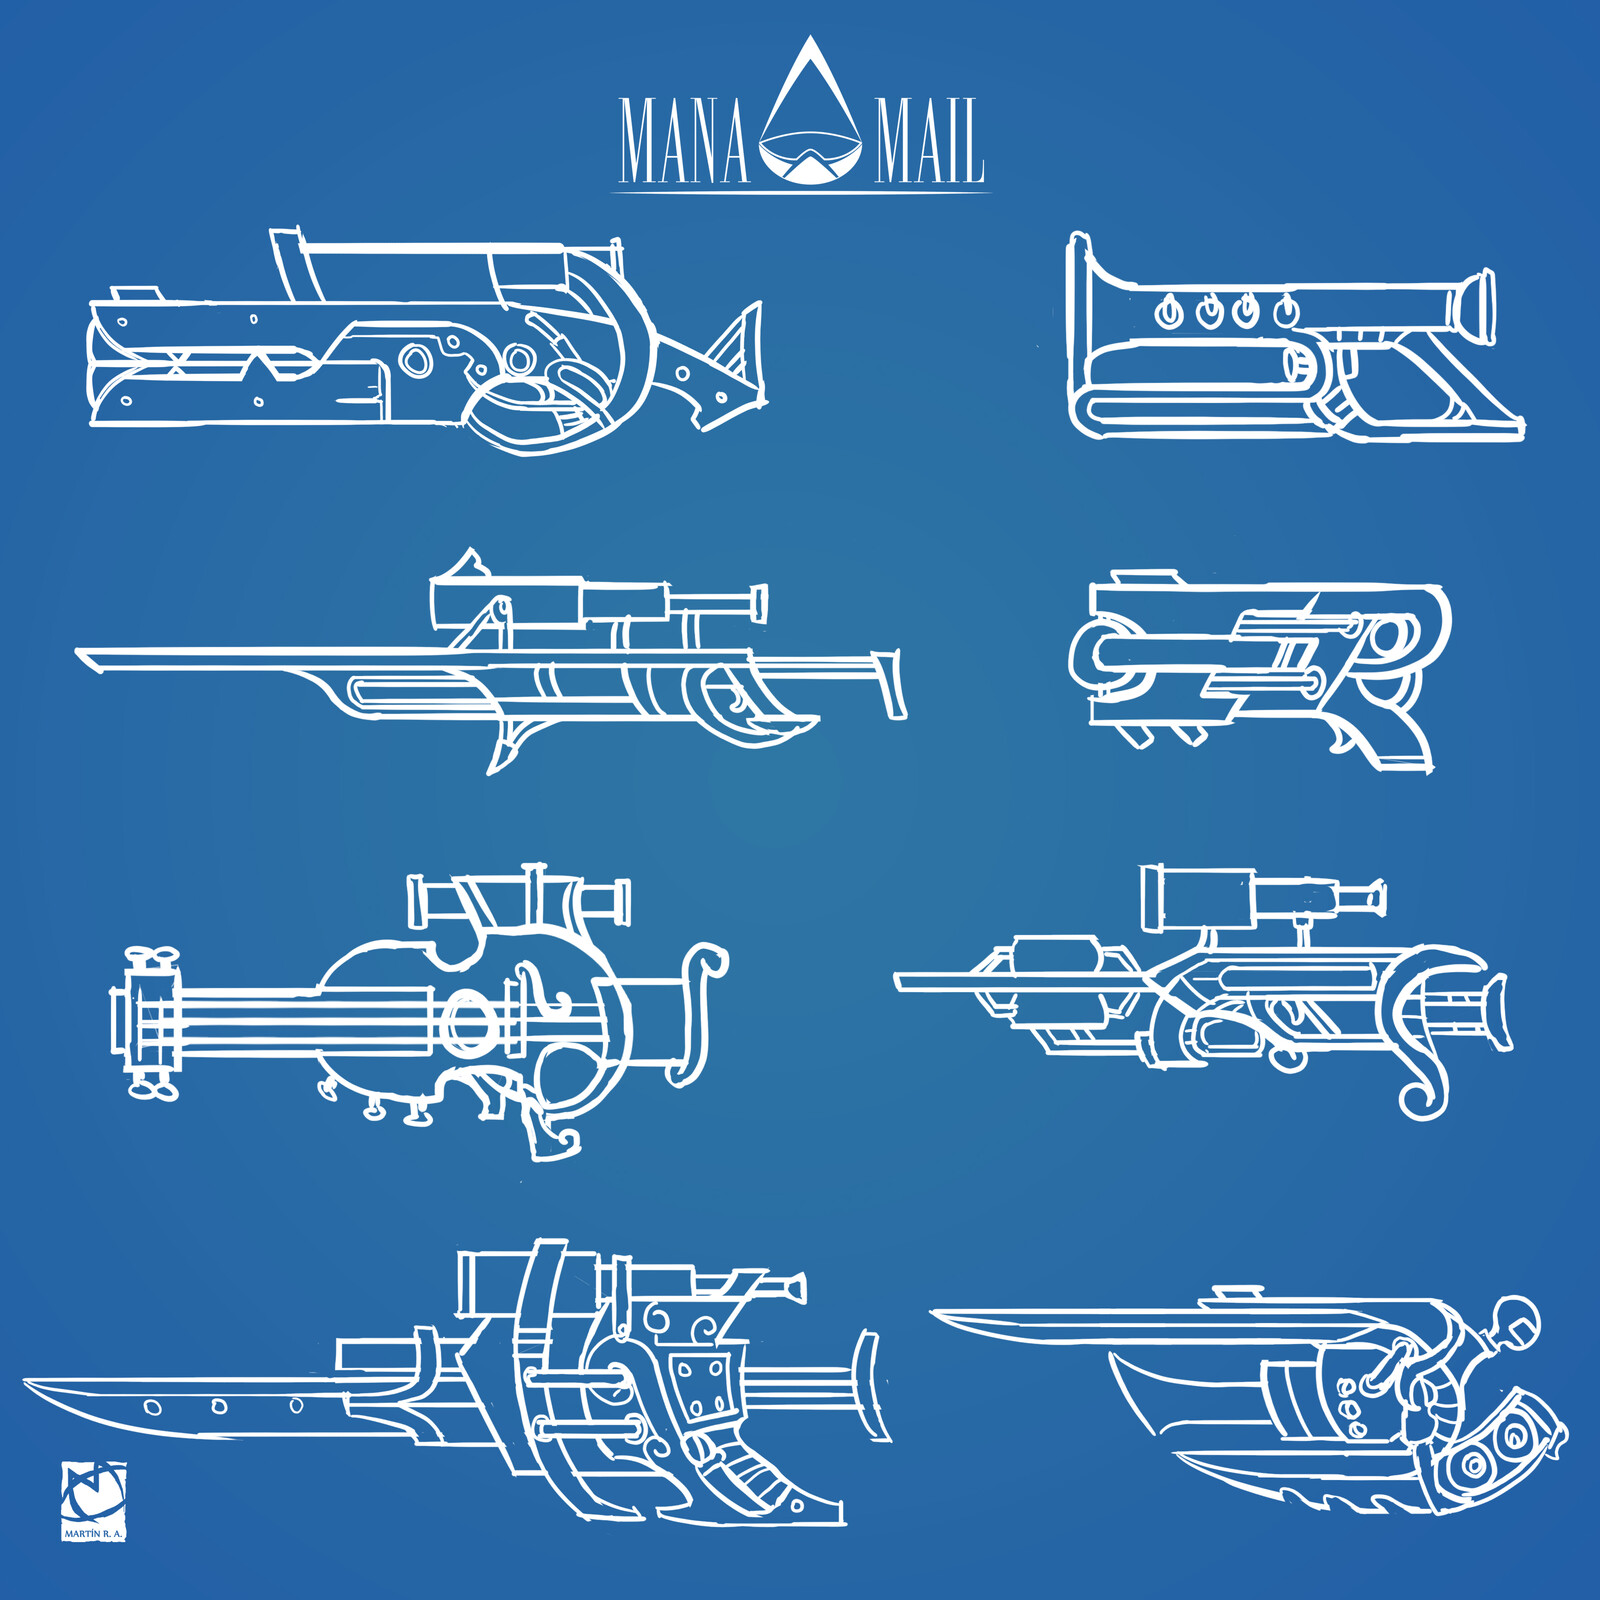 Some weapon designs